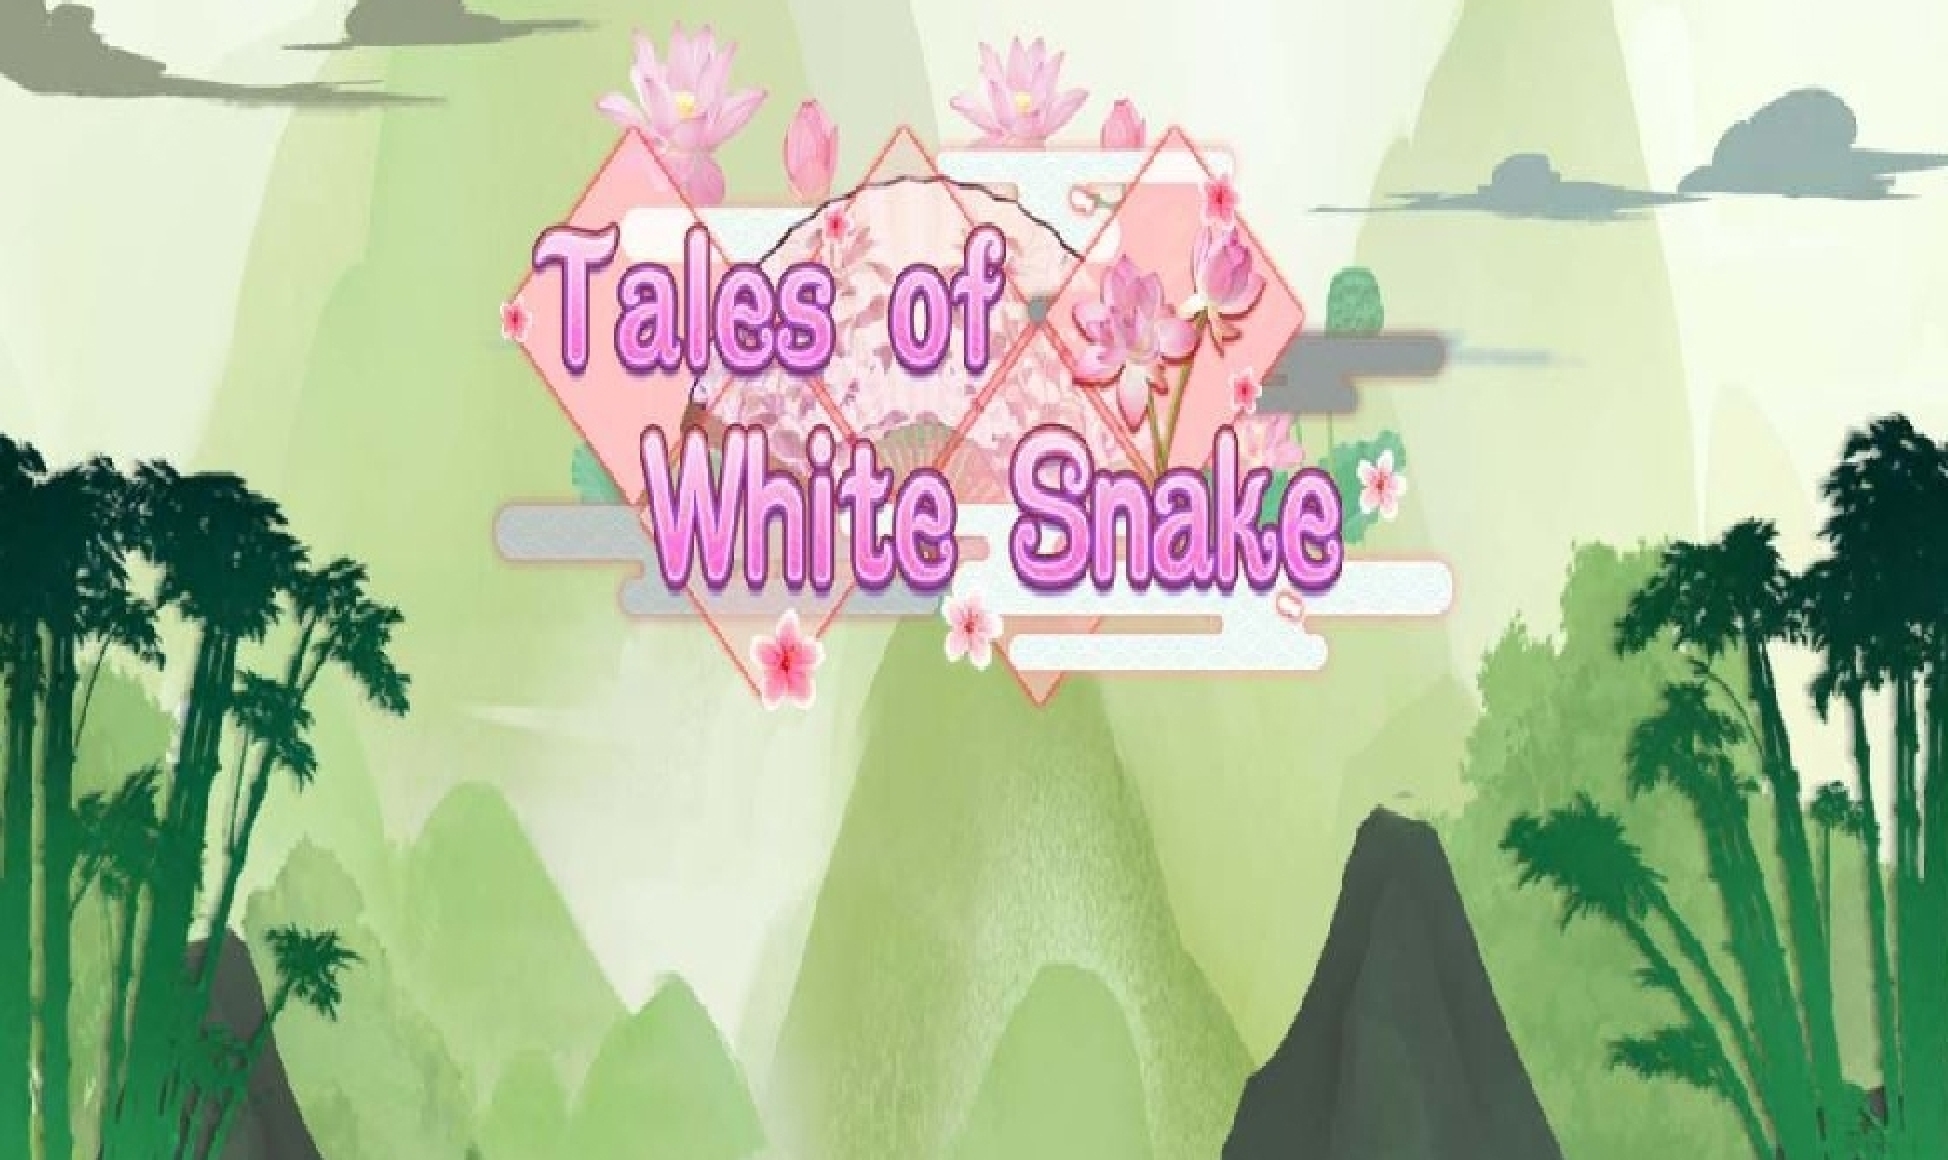 Tales of White Snake demo